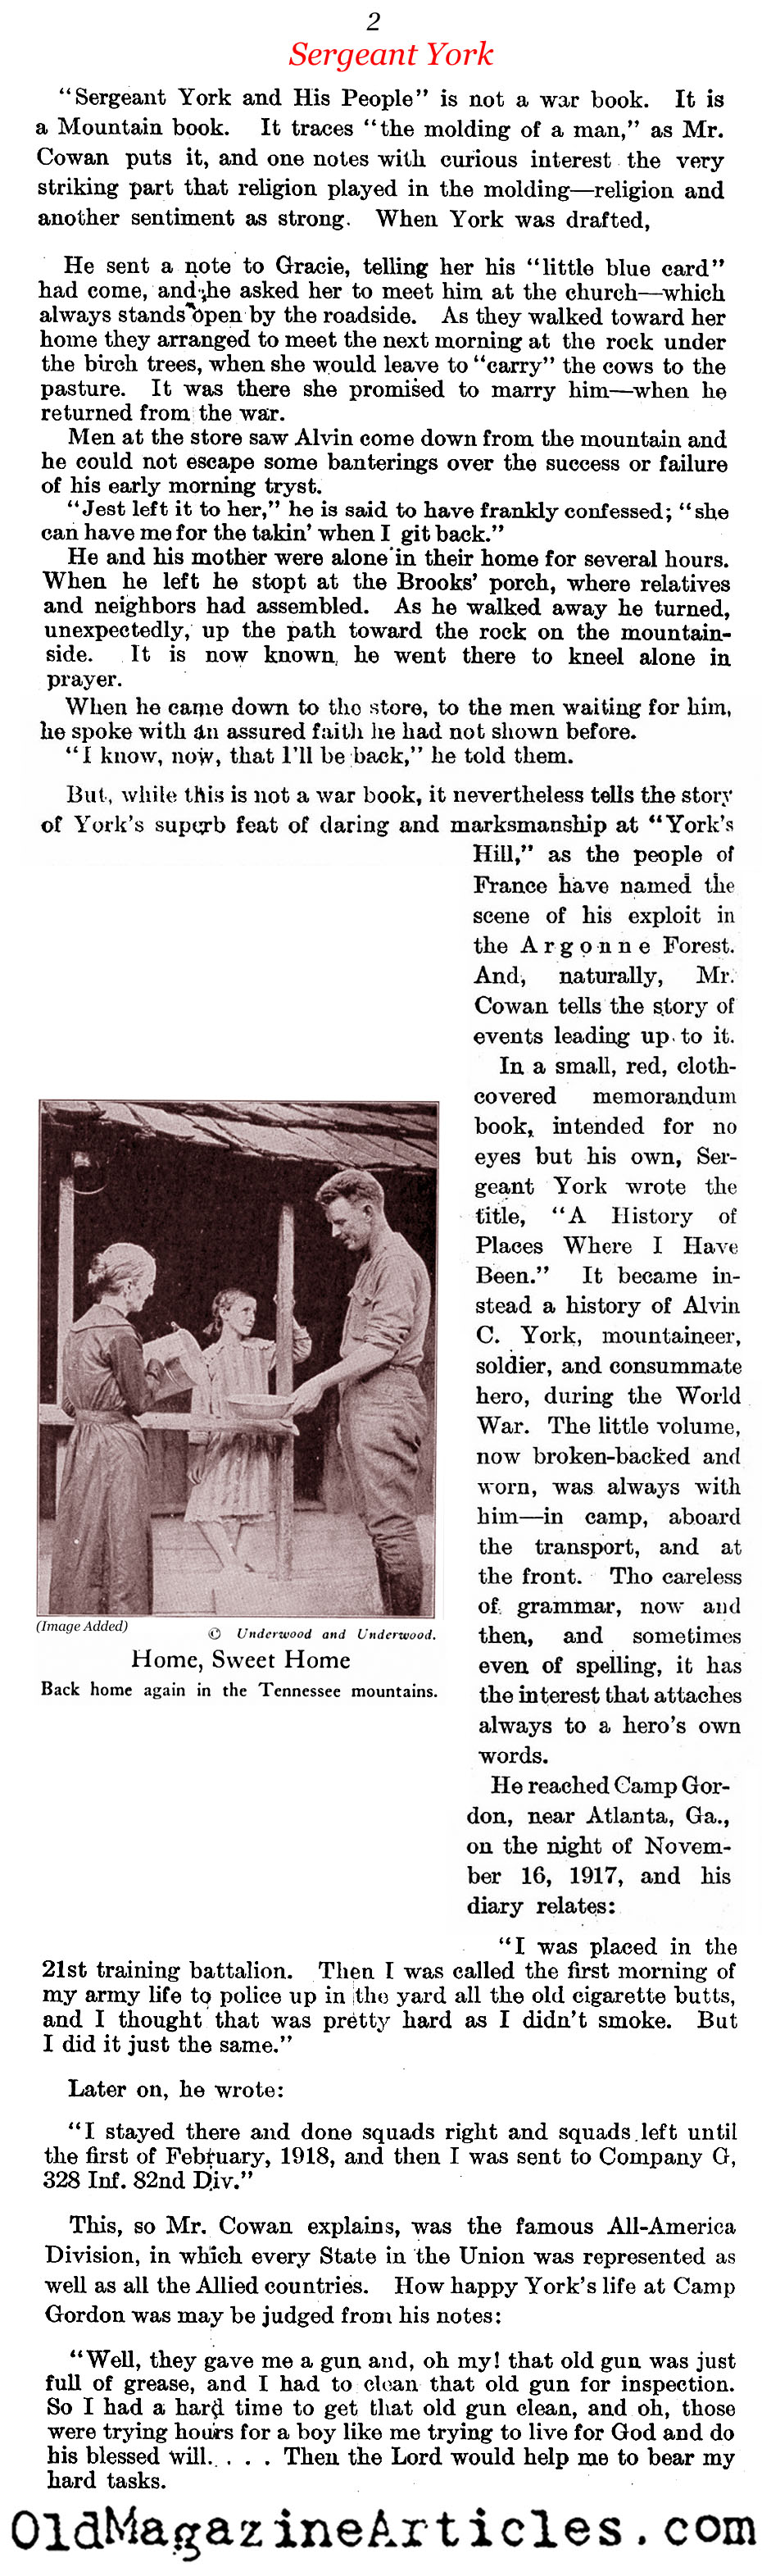 Sergeant York's Side of the Story (Literary Digest, 1922)